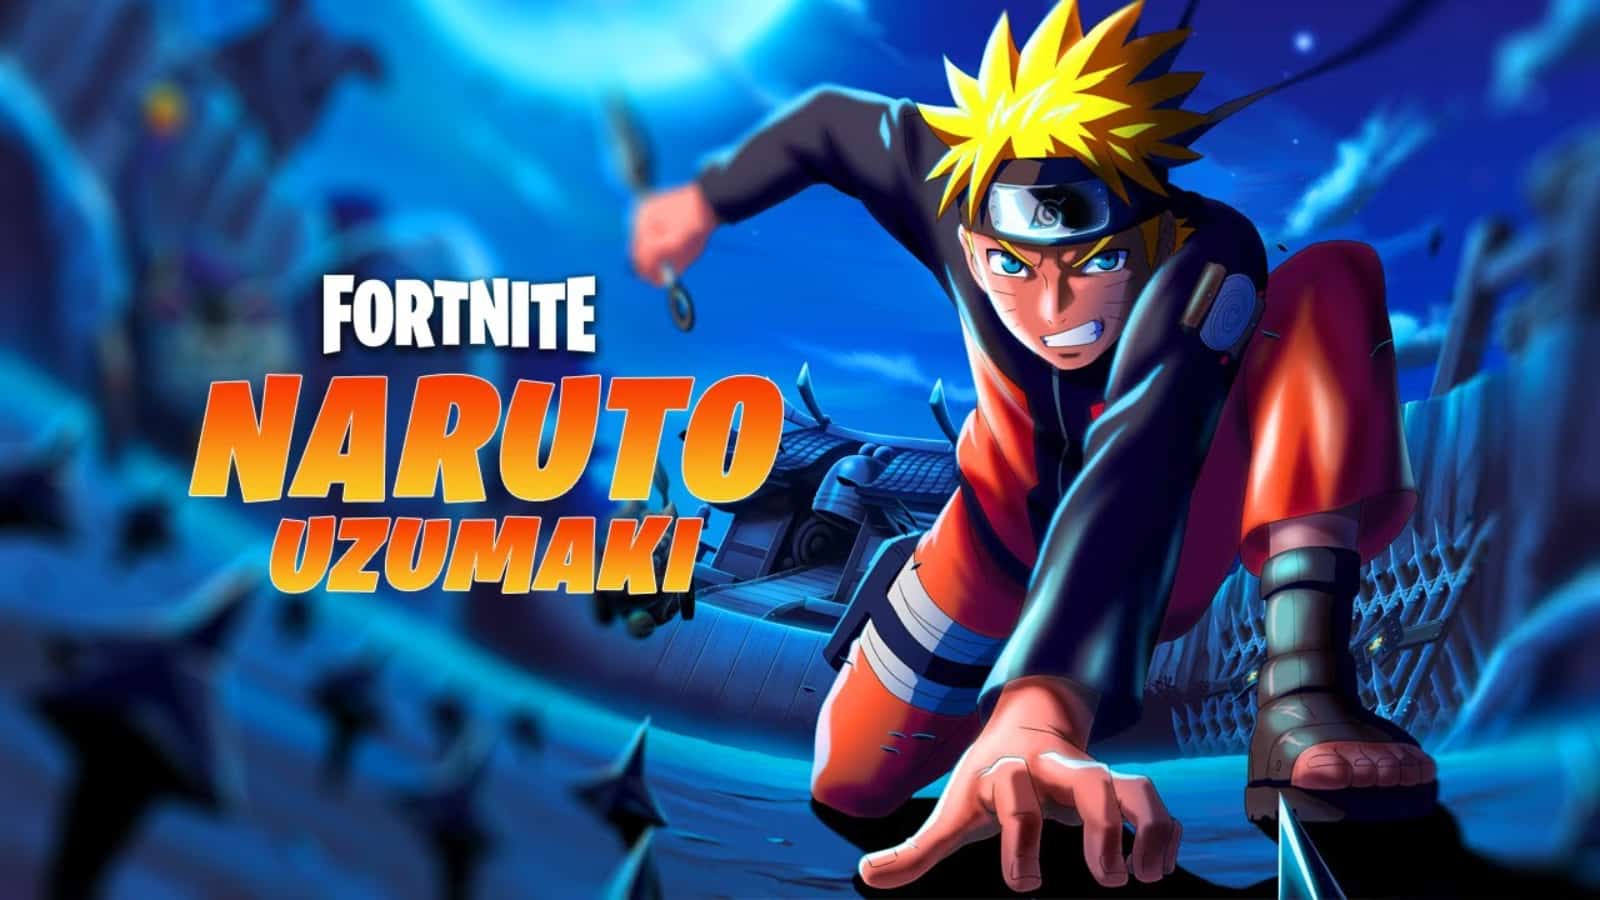 Naruto coming to Fortnite: Official Teaser confirms release in Season 8 FirstSportz